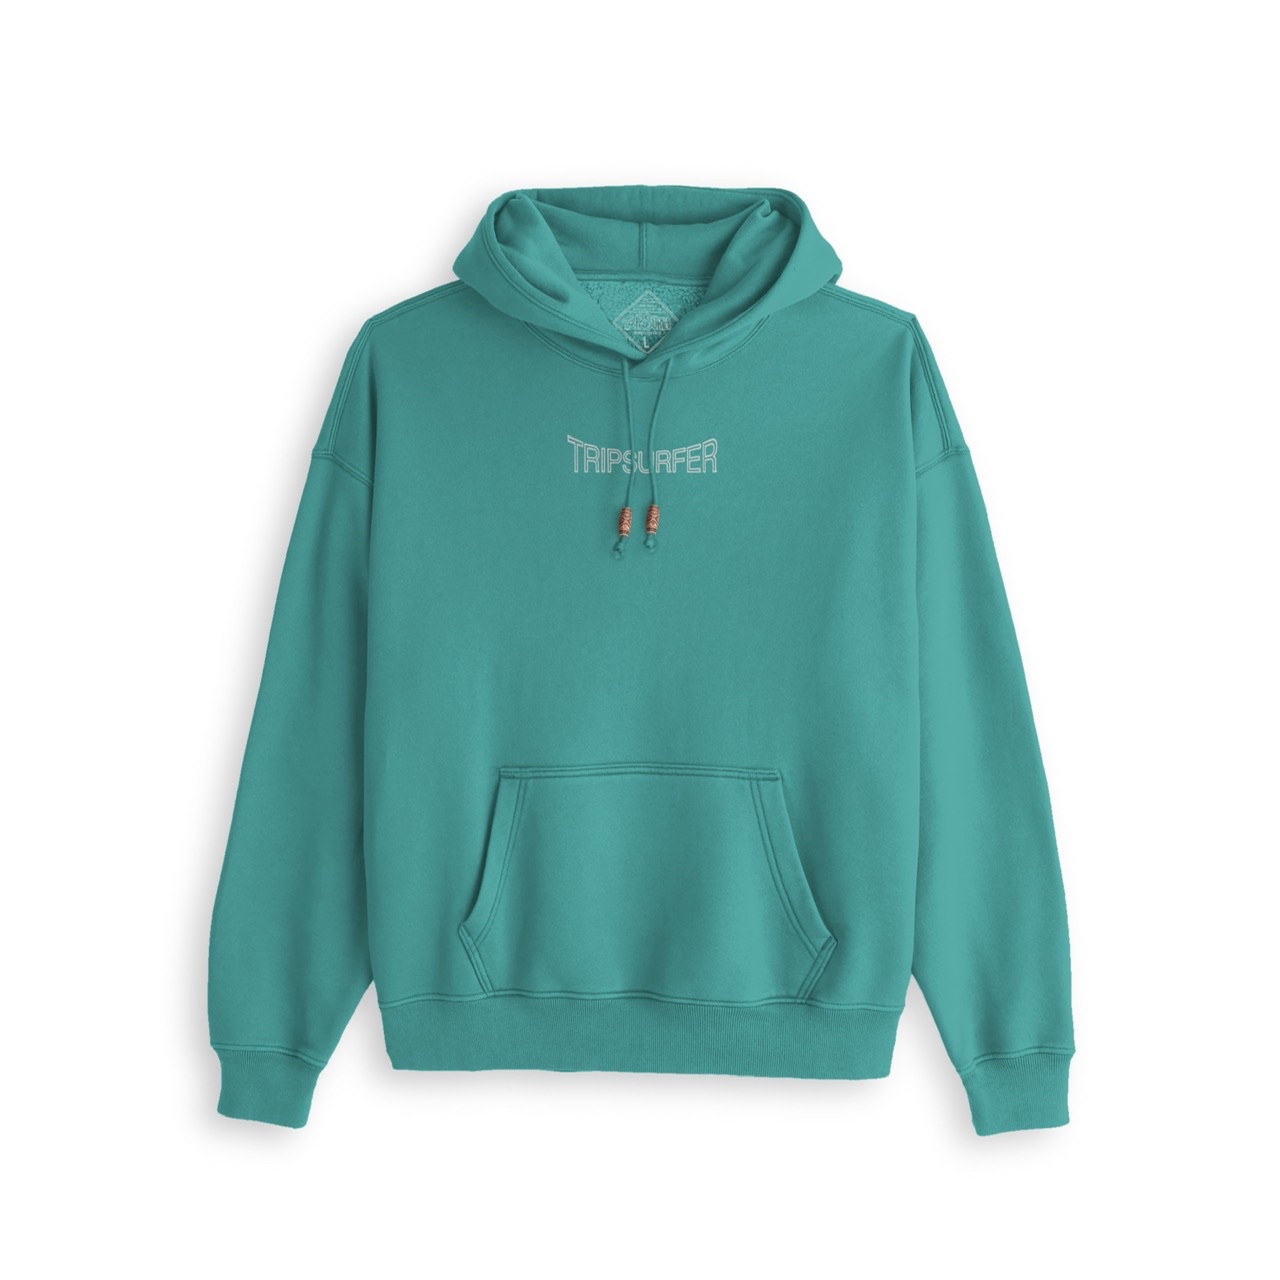 surfer-hoodie-teal-cotton-hoodie-surf-style-embroidered